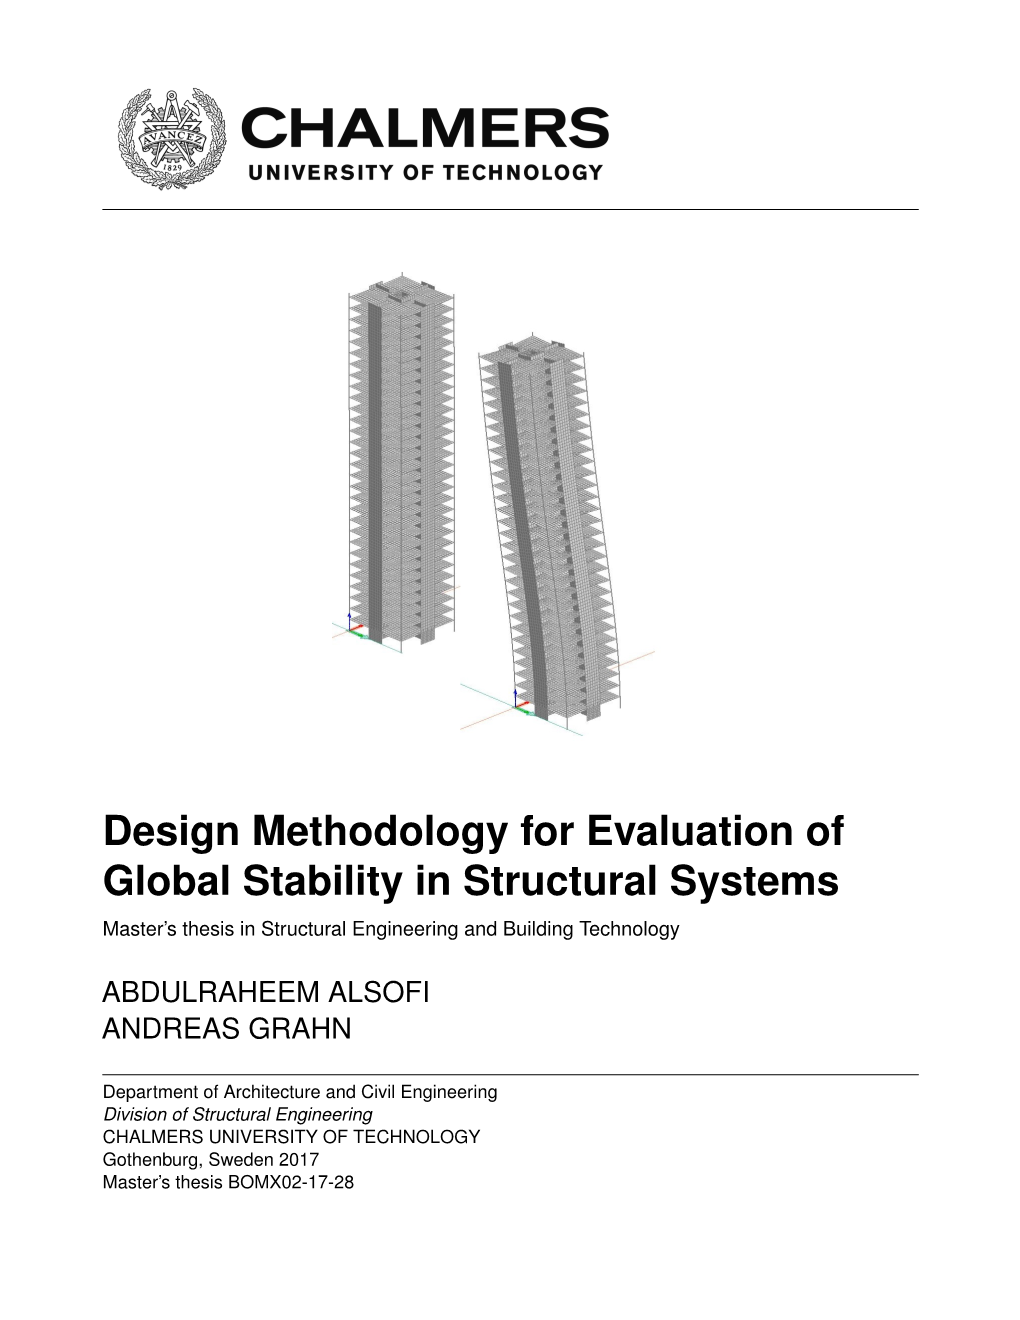 Design Methodology for Evaluation of Global Stability in Structural Systems Master’S Thesis in Structural Engineering and Building Technology